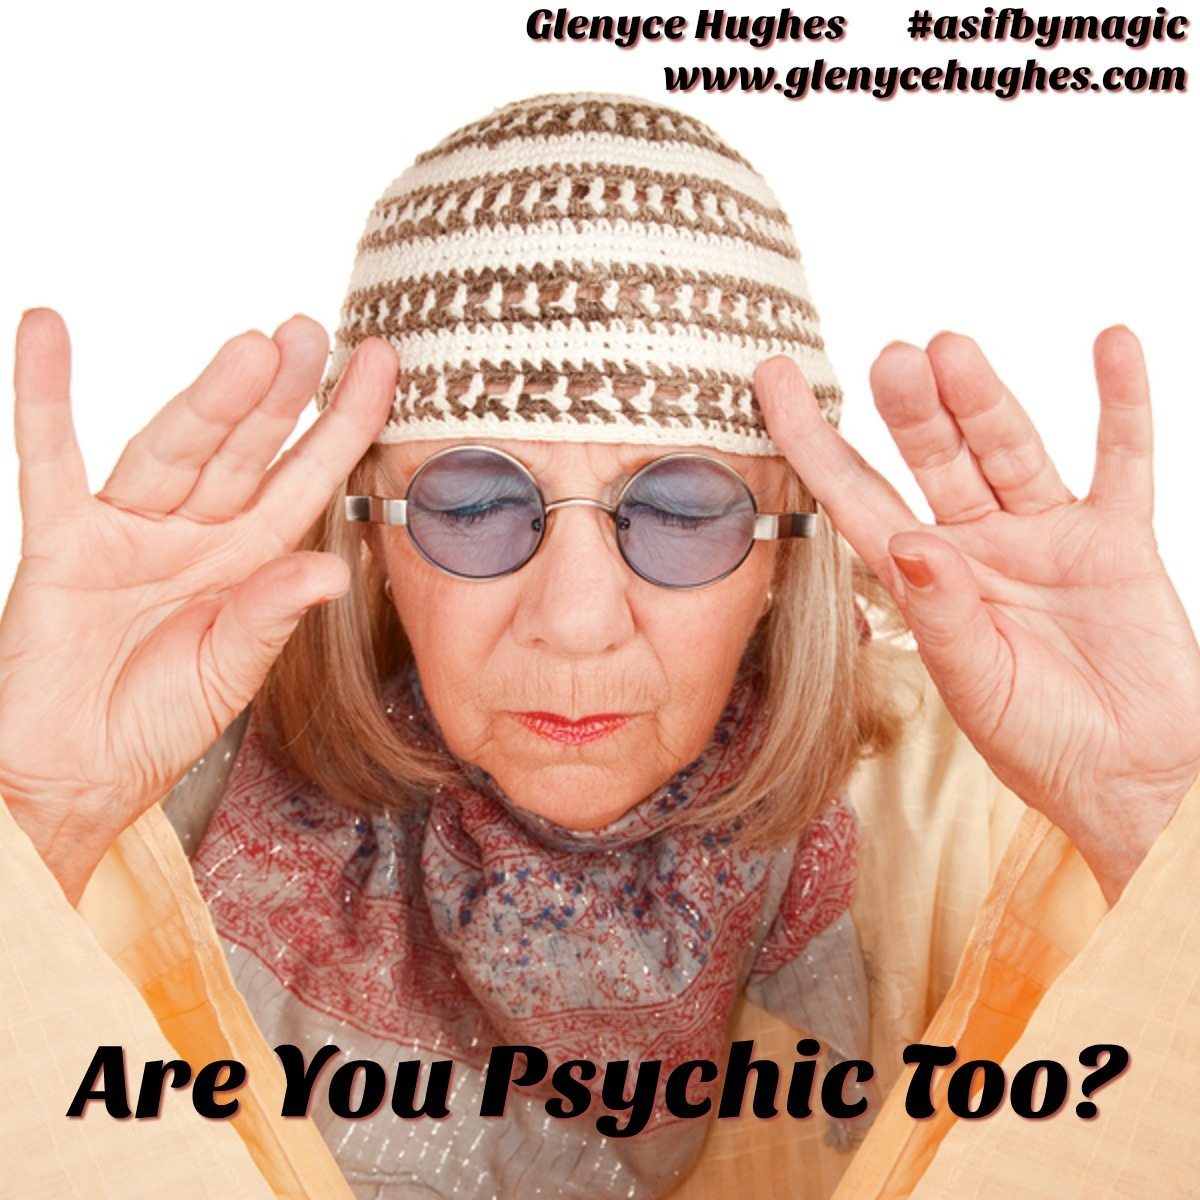 Are You a Psychic Too?